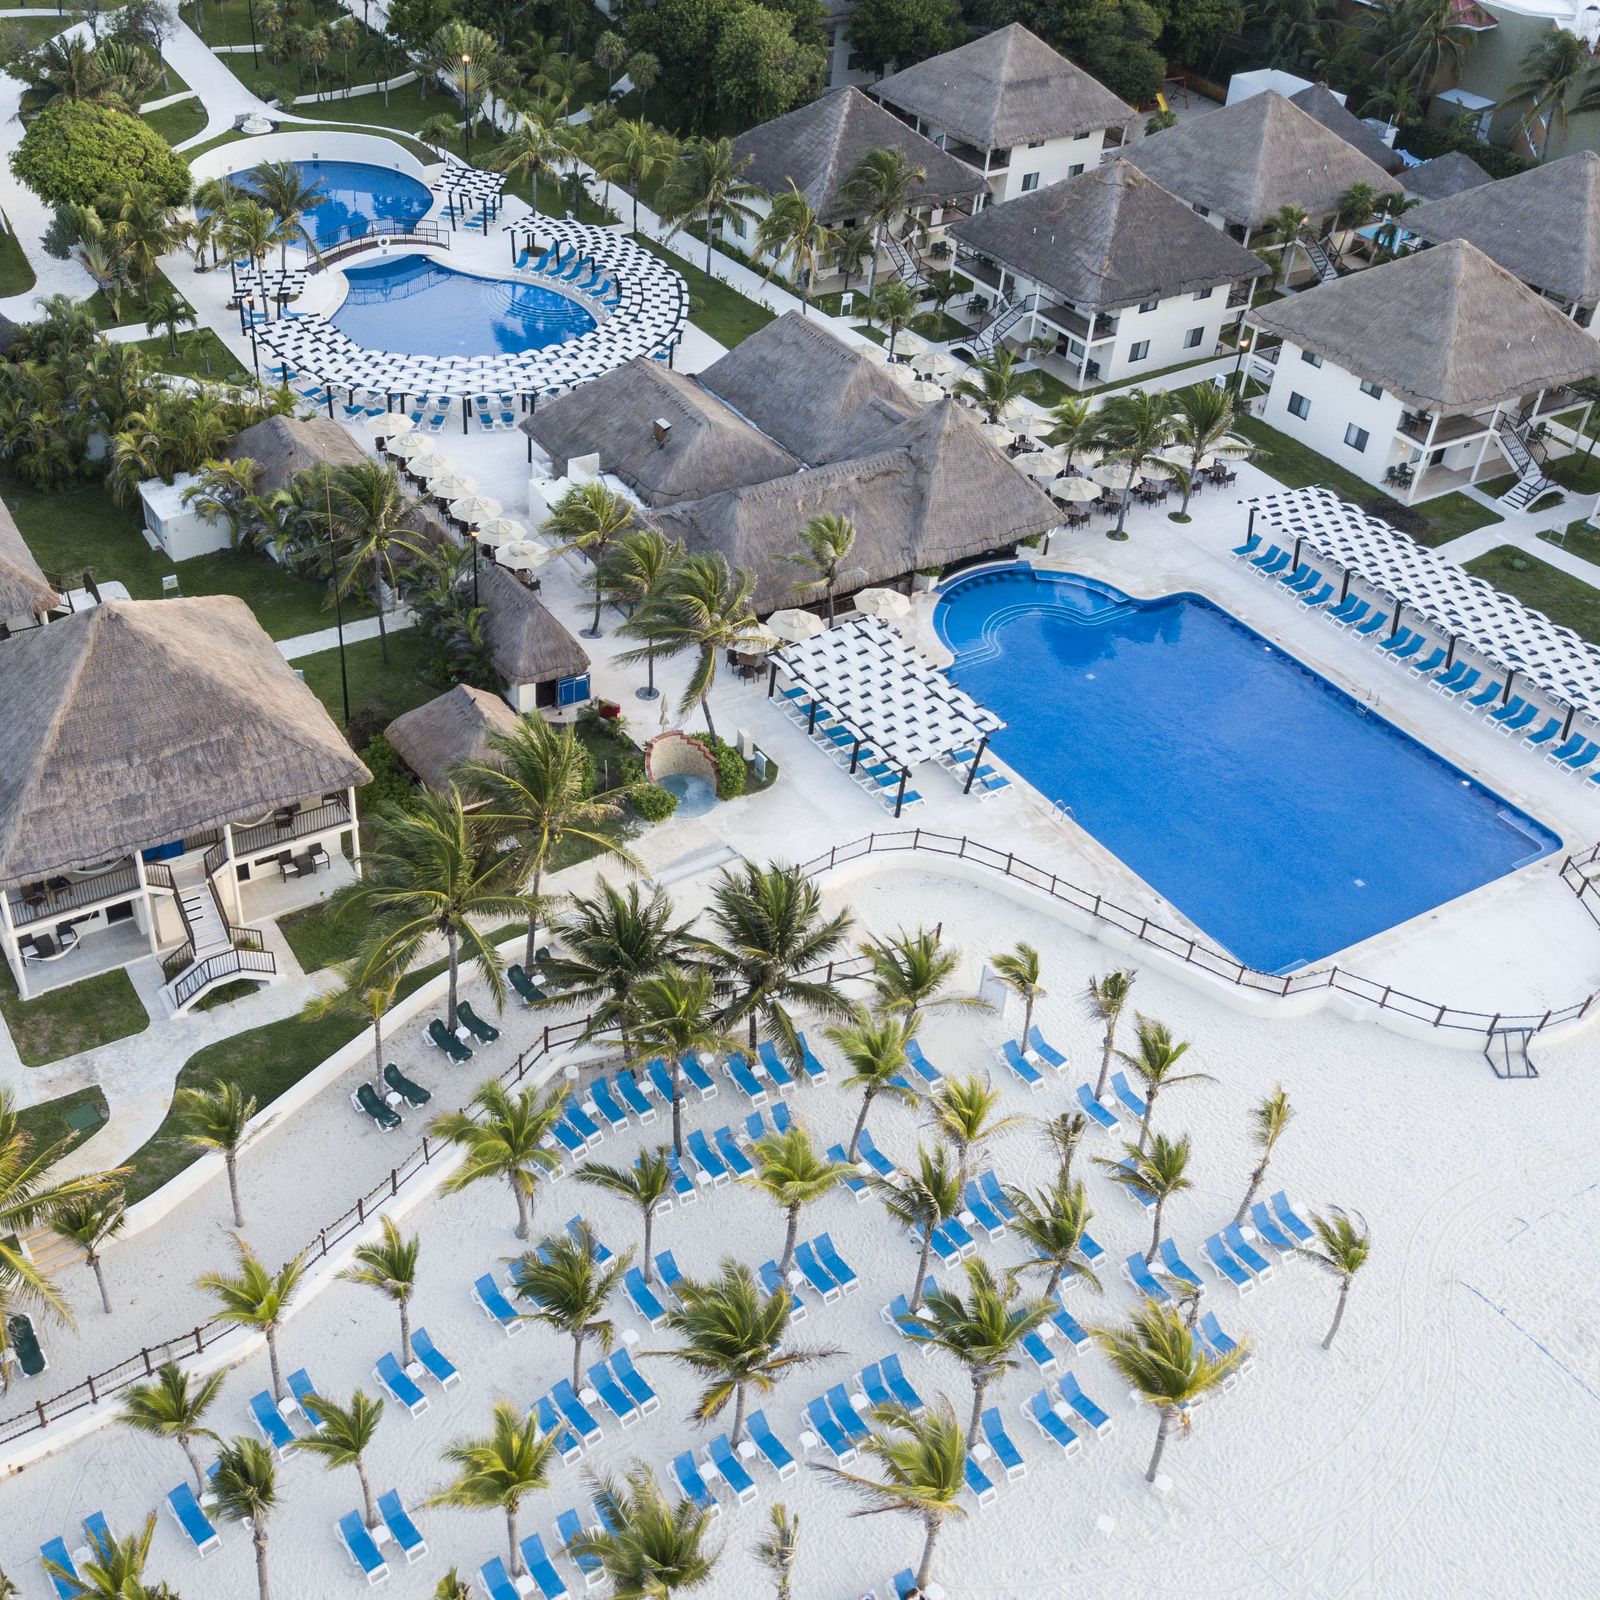 Refurbished hotels for couples on the Riviera Maya